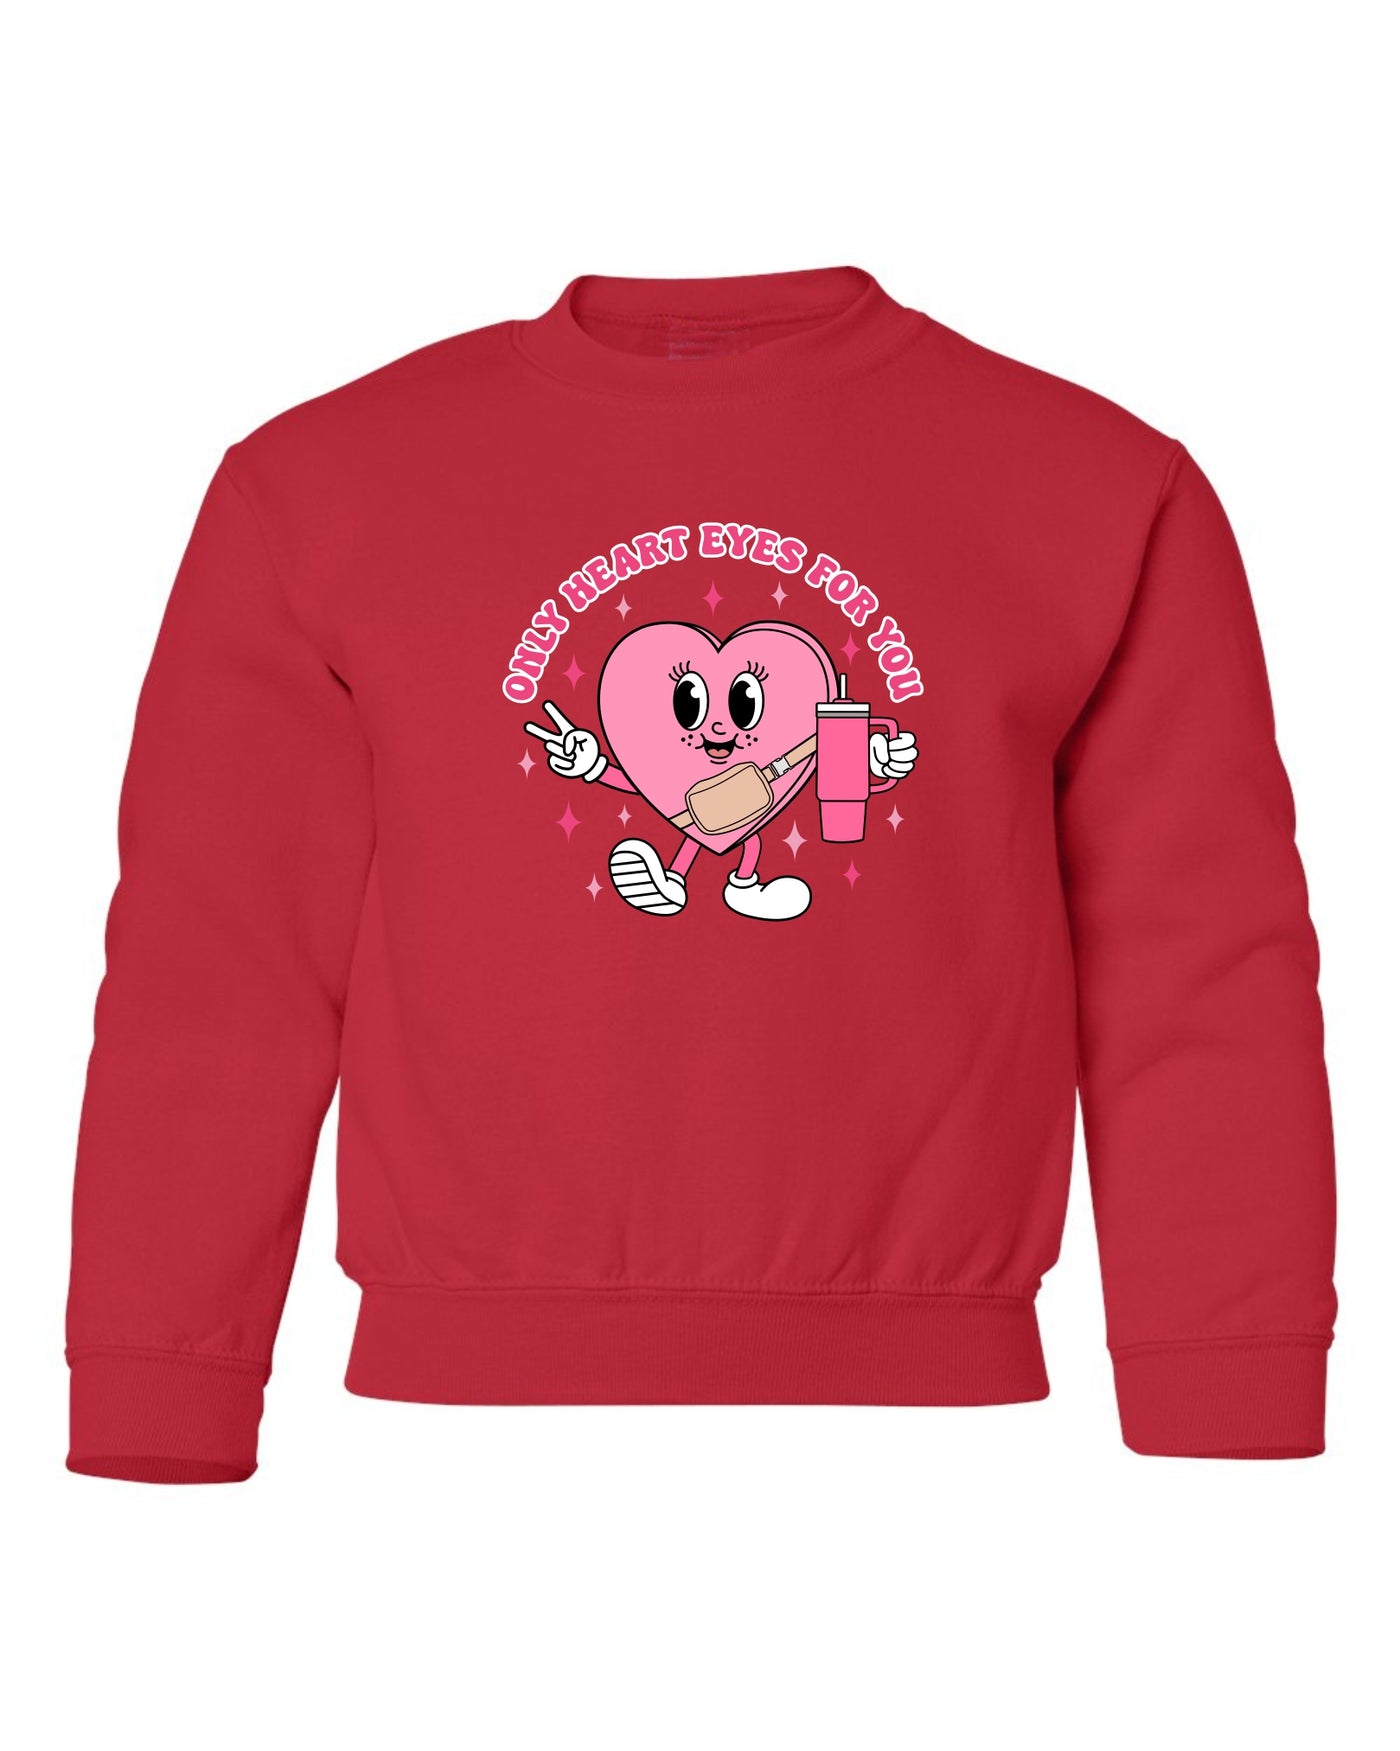 "Heart Eyes Only For You" Toddler/Youth Crewneck Sweatshirt